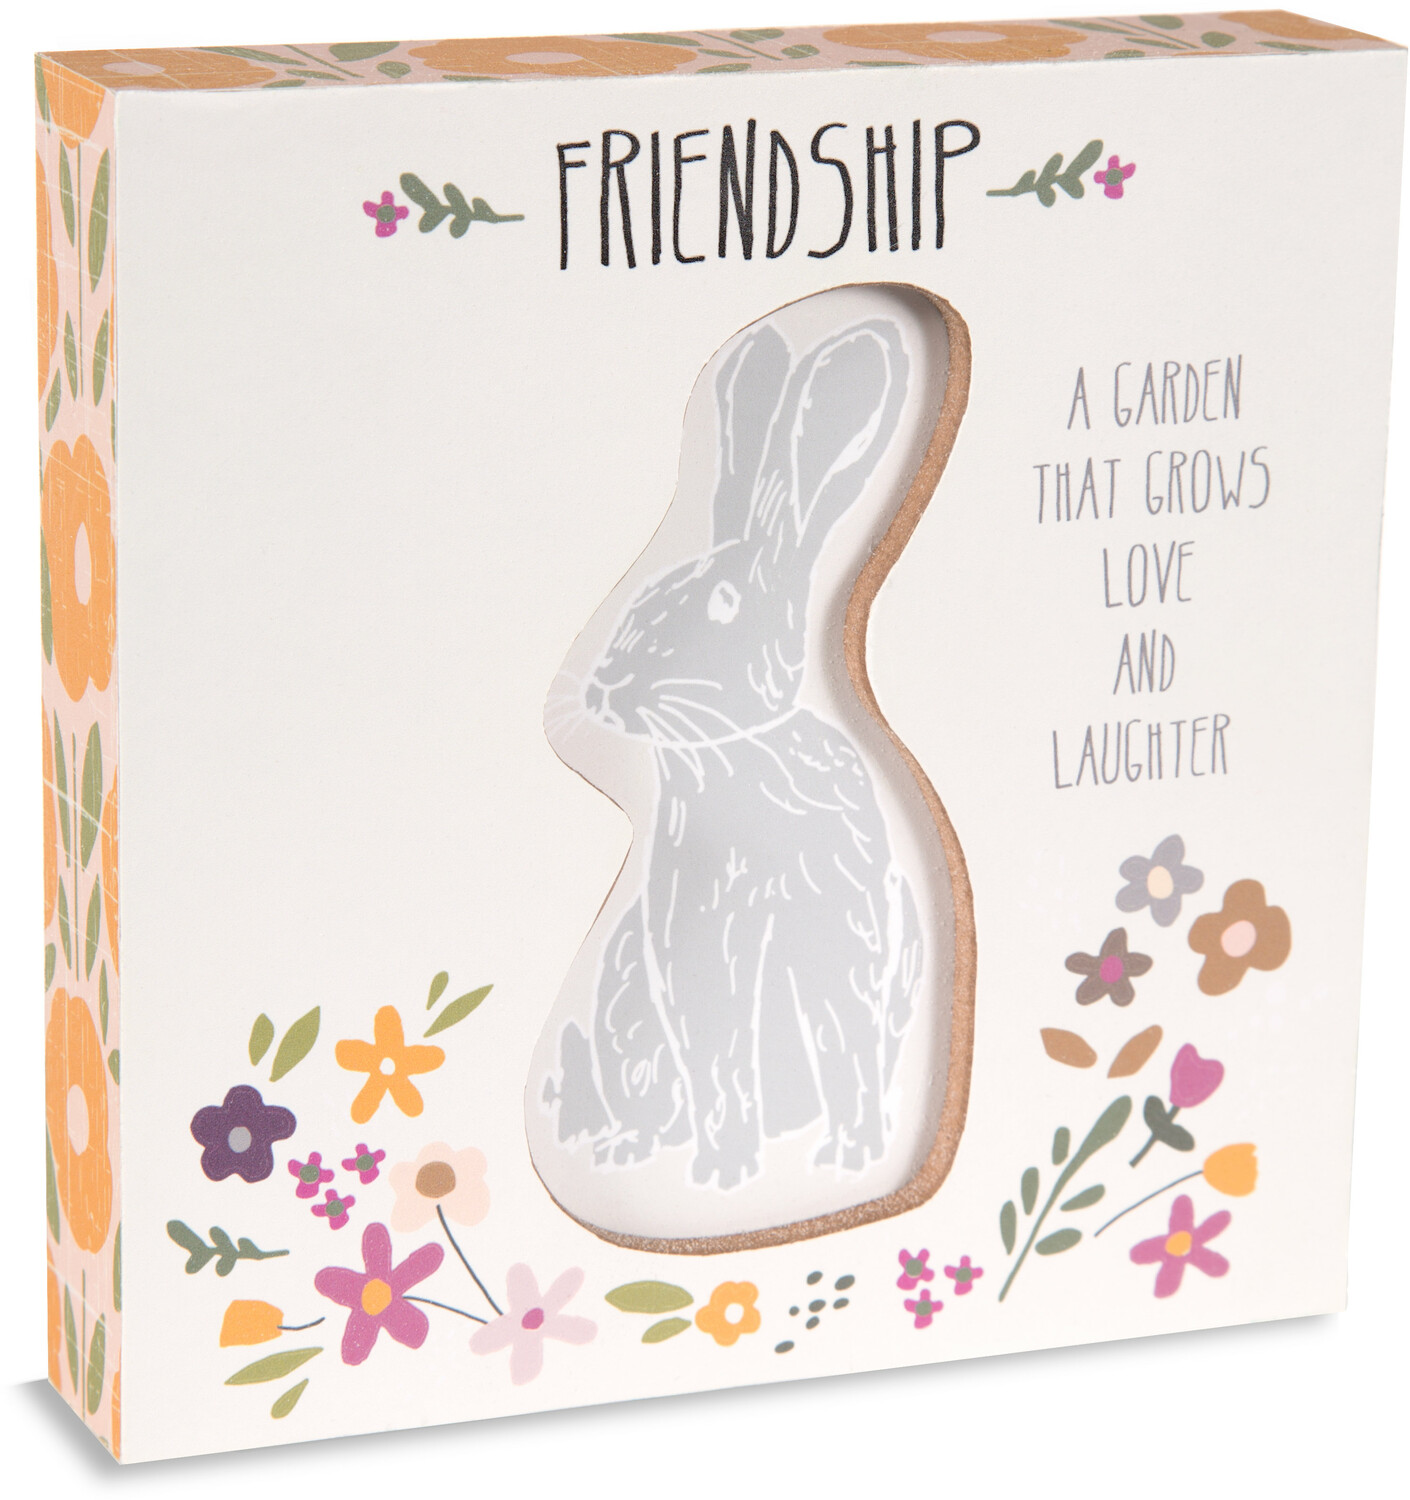 Friendship by Bless My Bloomers - Friendship - 5" x 5" Plaque